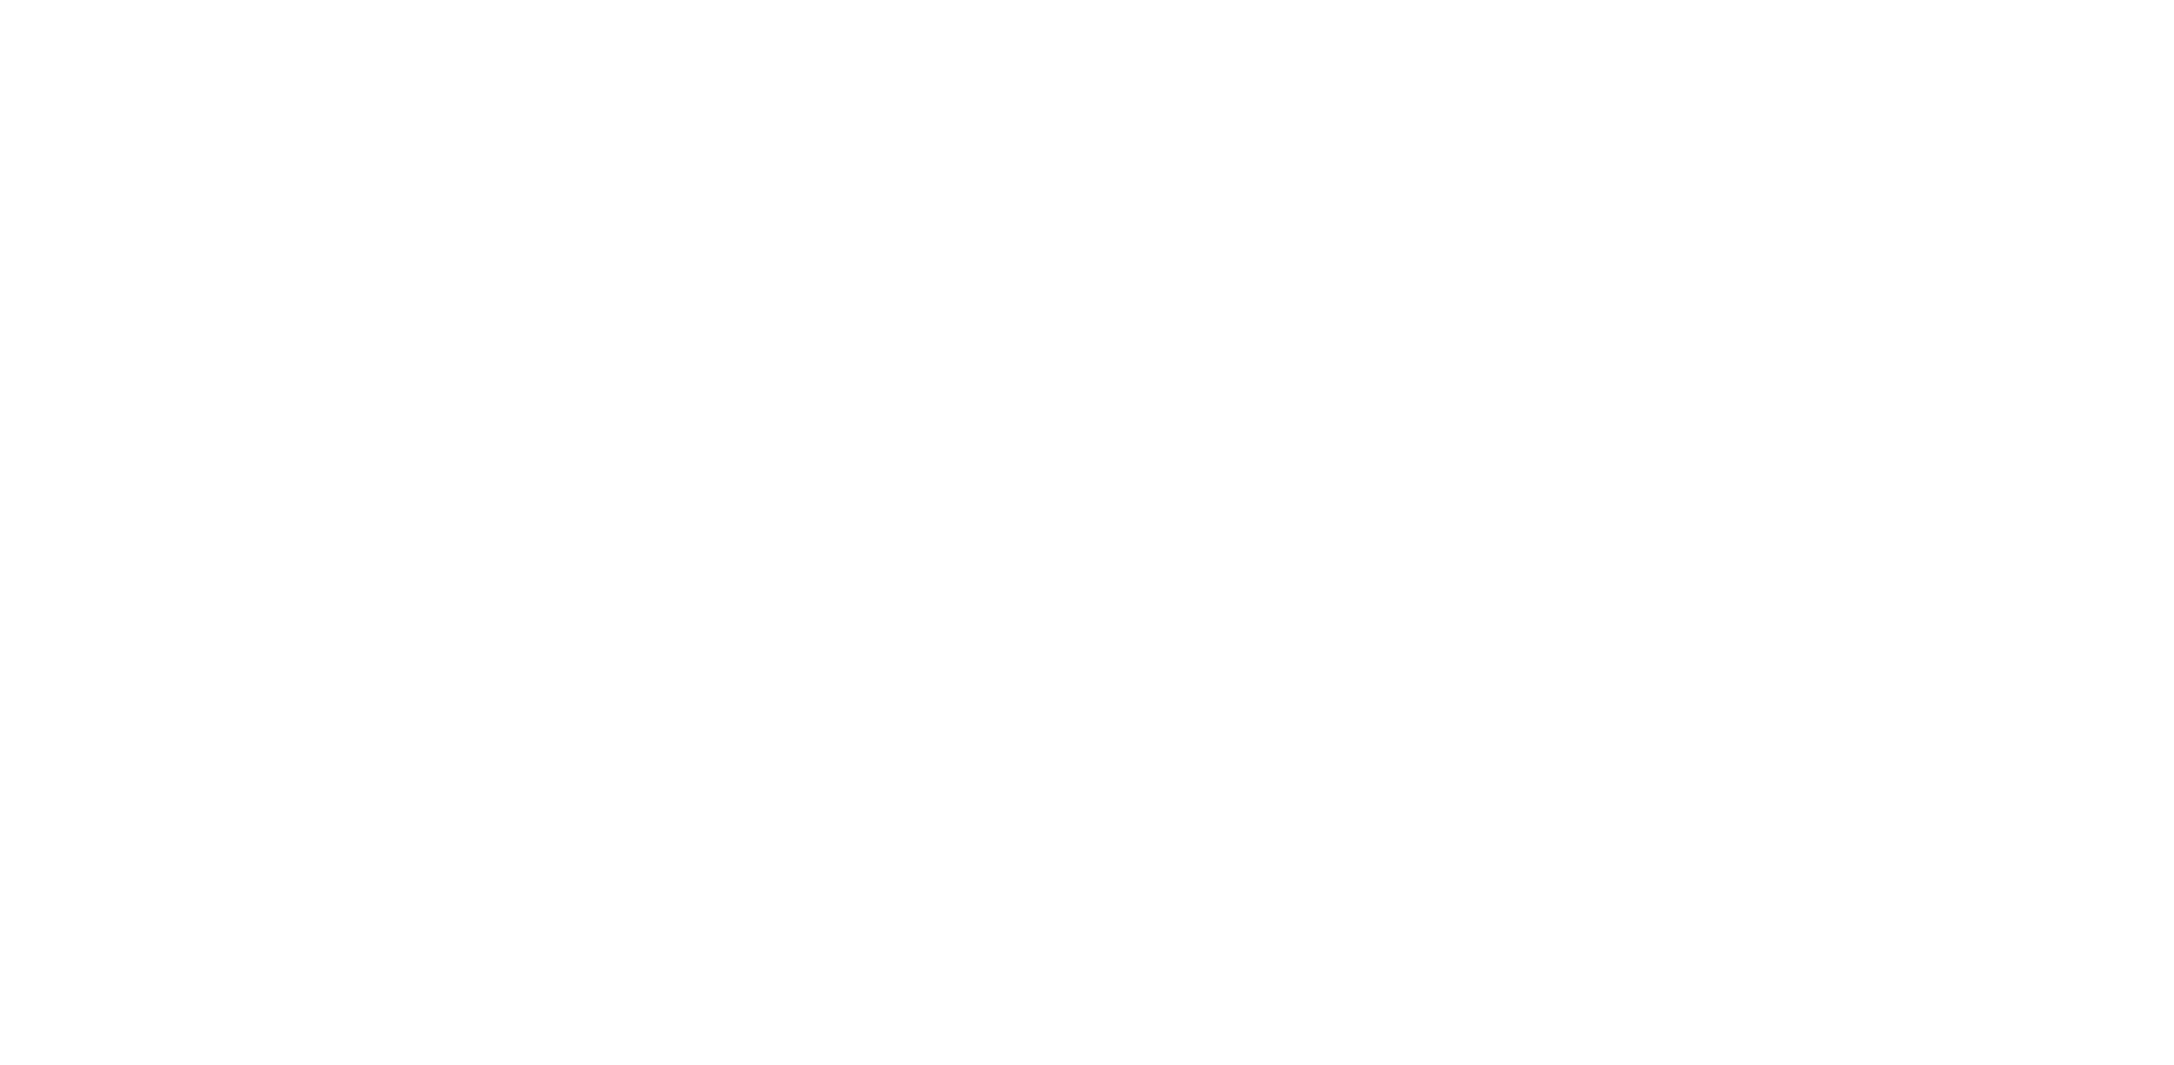 ВИЖДАШ ЛИ МЕ? Can you see me?